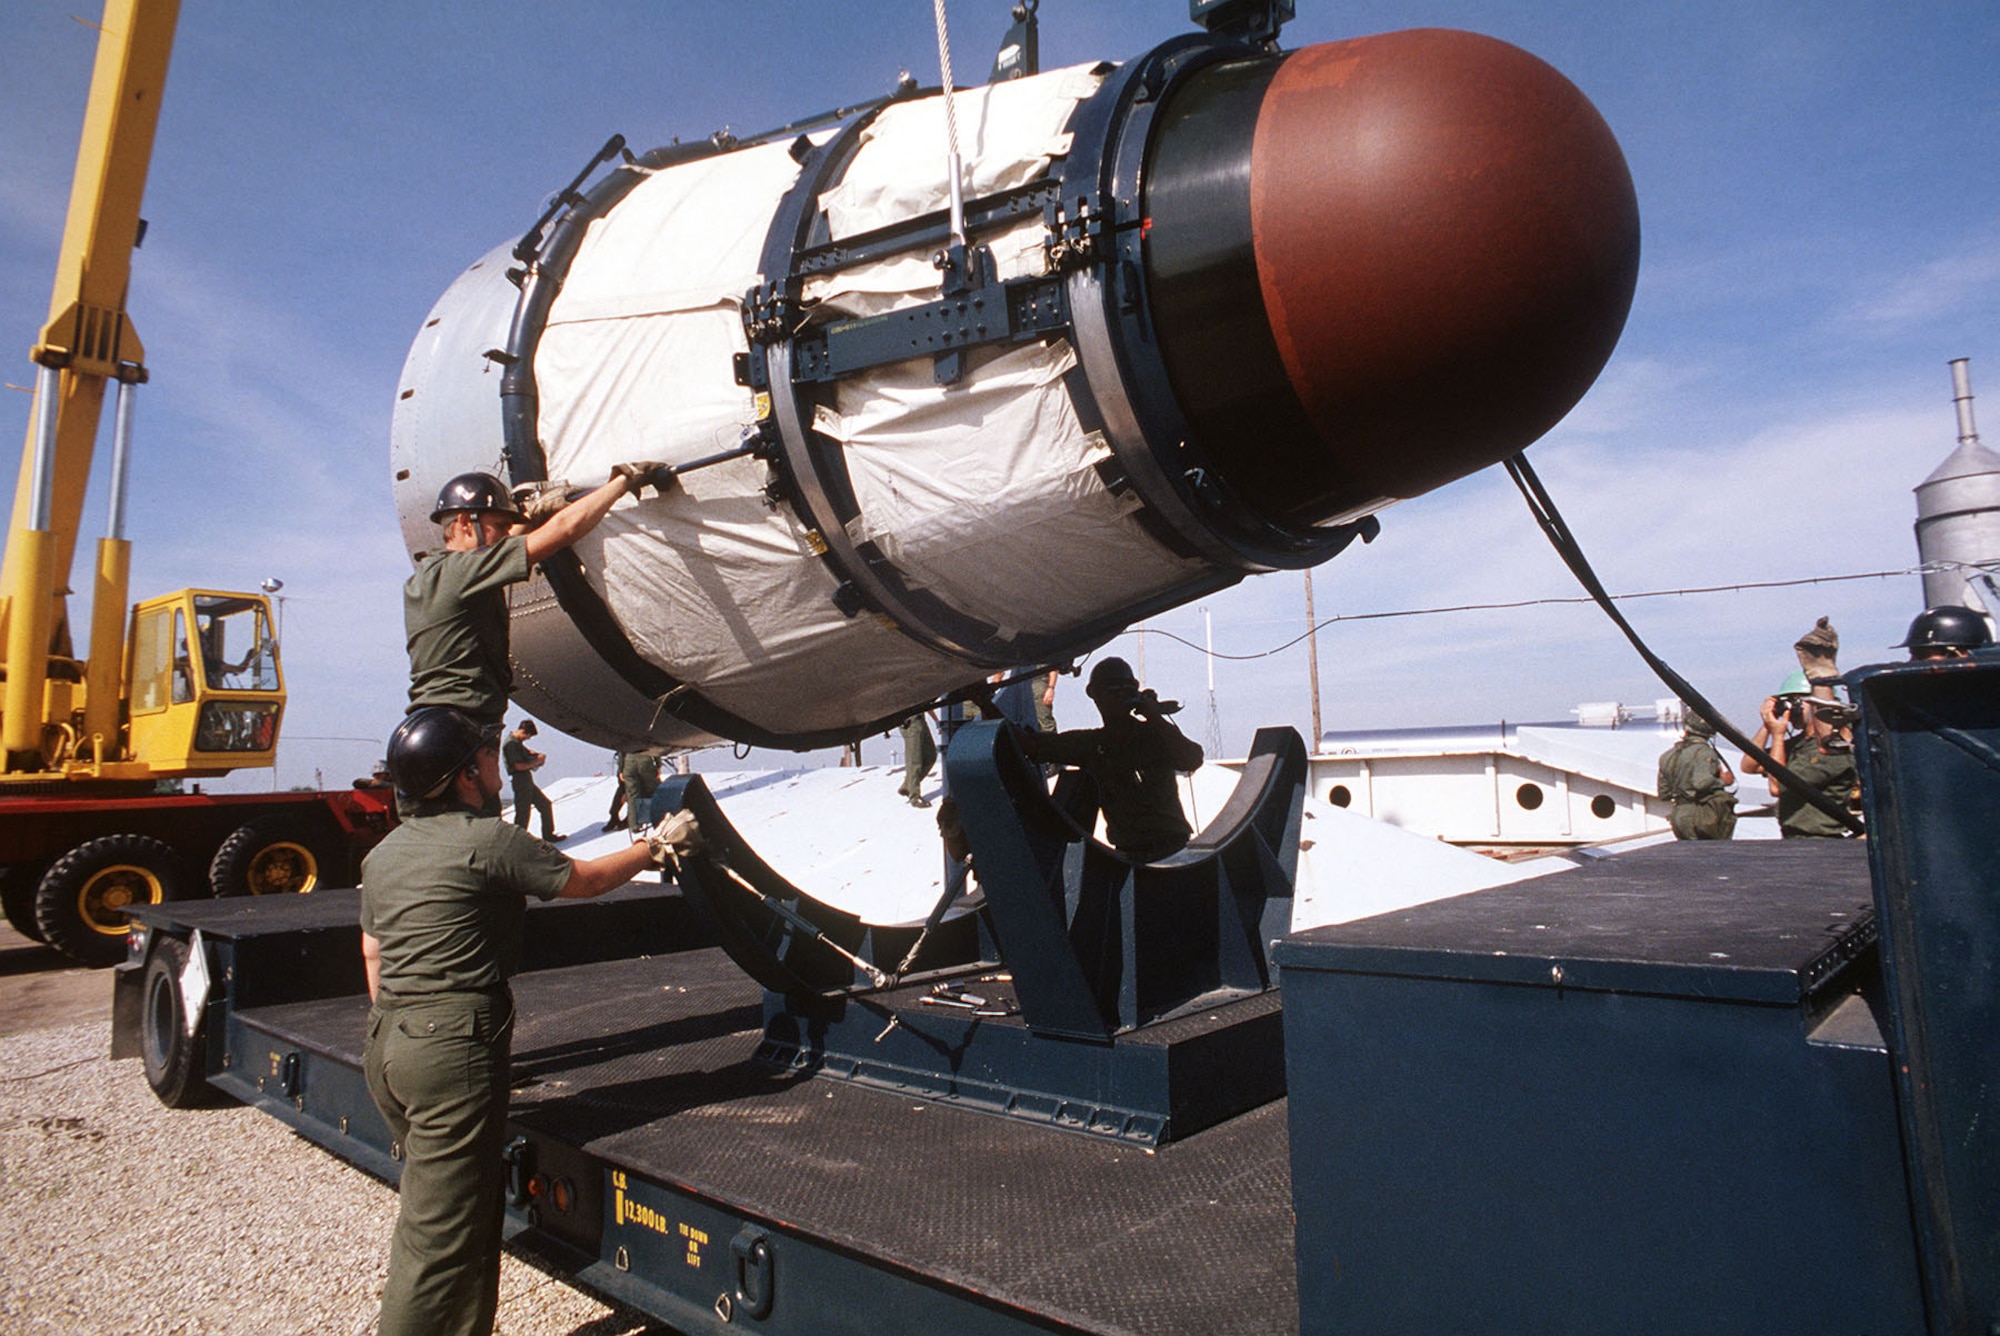 Maintenance personnel removing the Mk-6 re-entry vehicle from a Titan II missile. (U.S. Air Force photo)